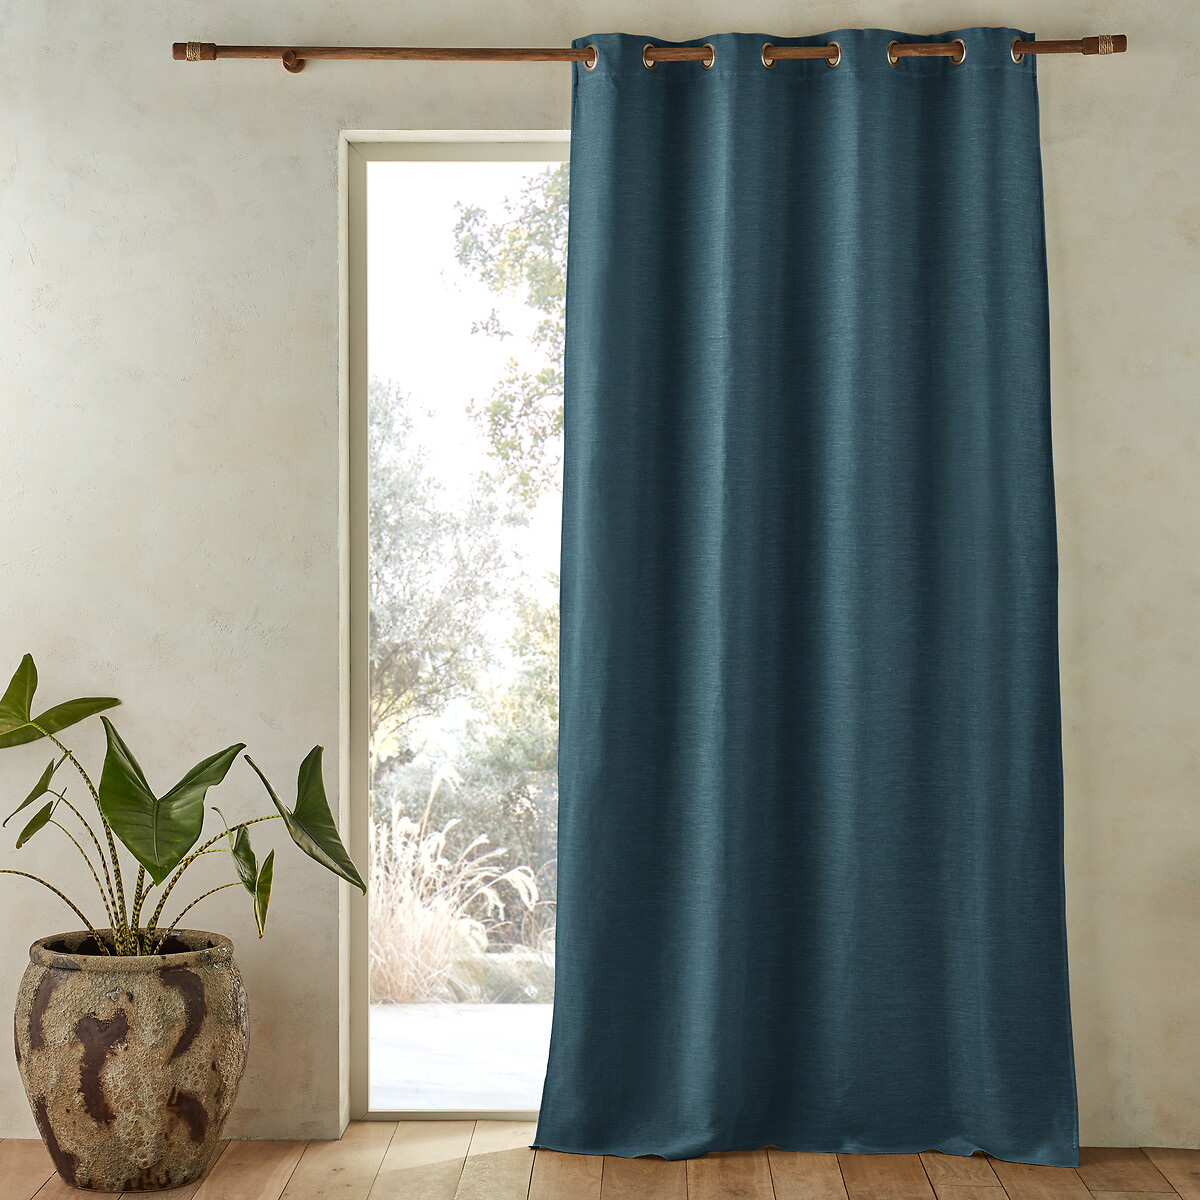 Colin Pure Linen Blackout Curtain with Eyelets